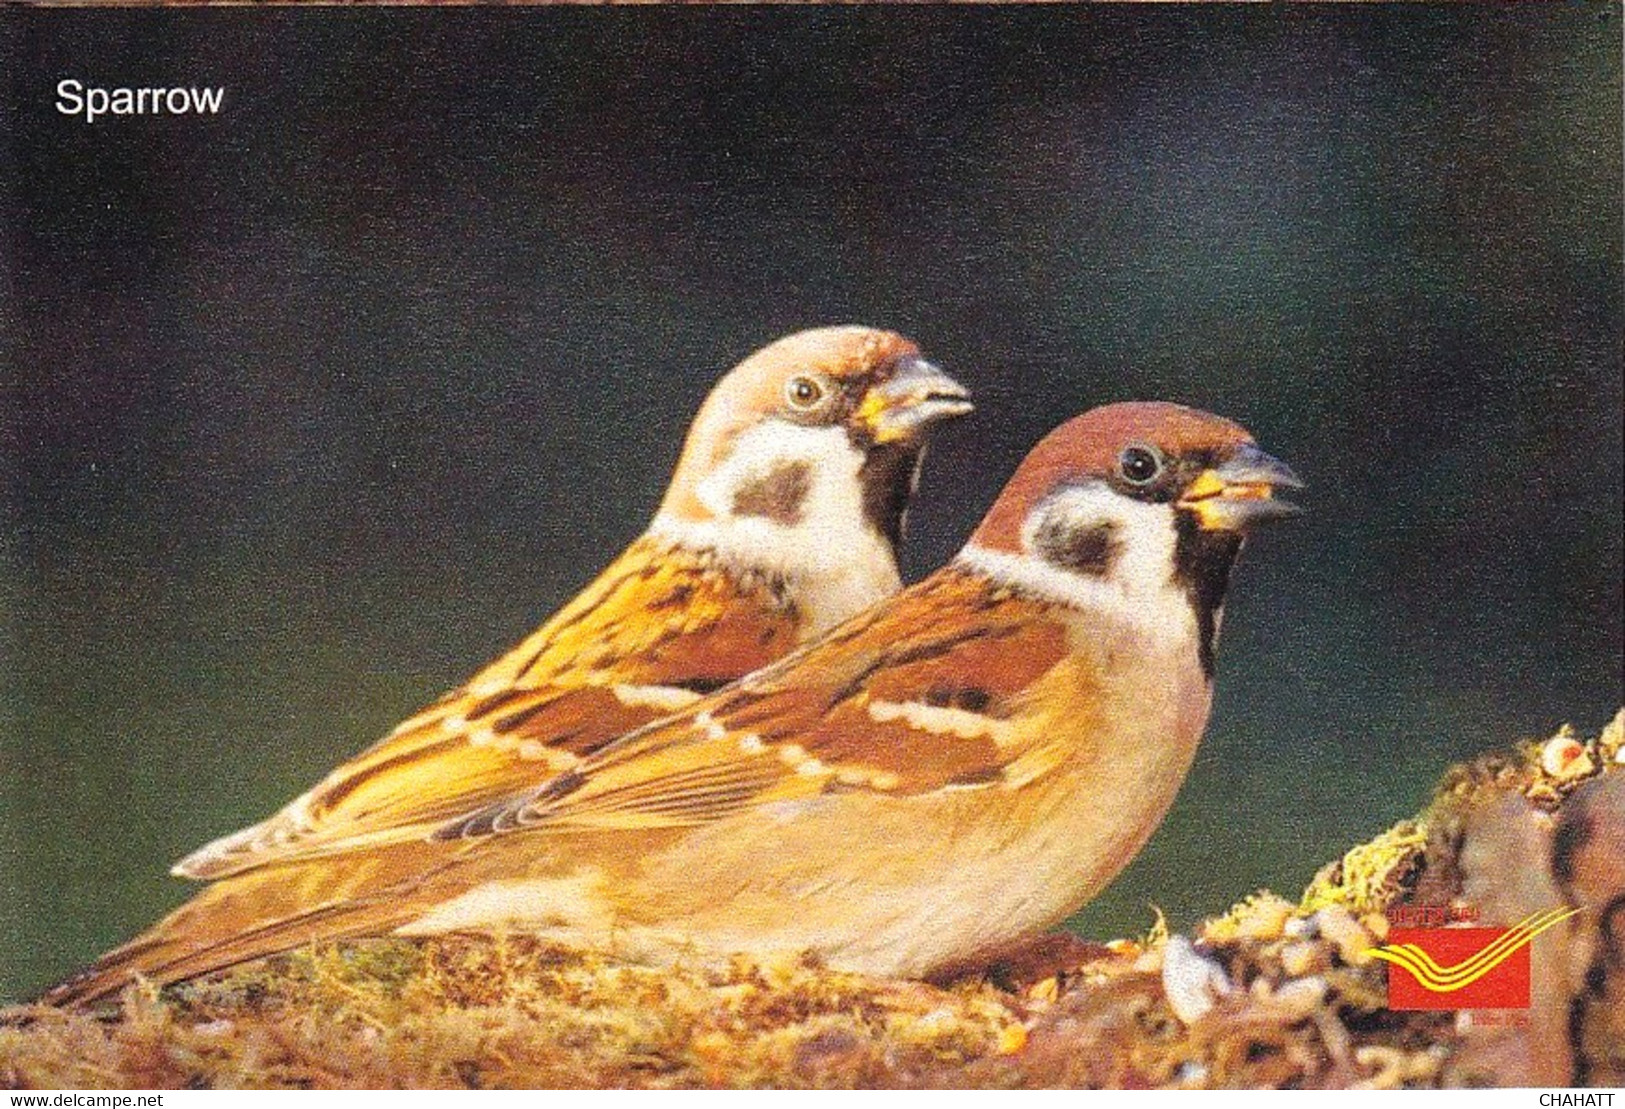 BIRDS- SPARROWS - PPC- GLOSSY PRINT - INDIA POST-OFFICIAL ISSUE- MNH- SCARCE-NMC-203 - Passeri